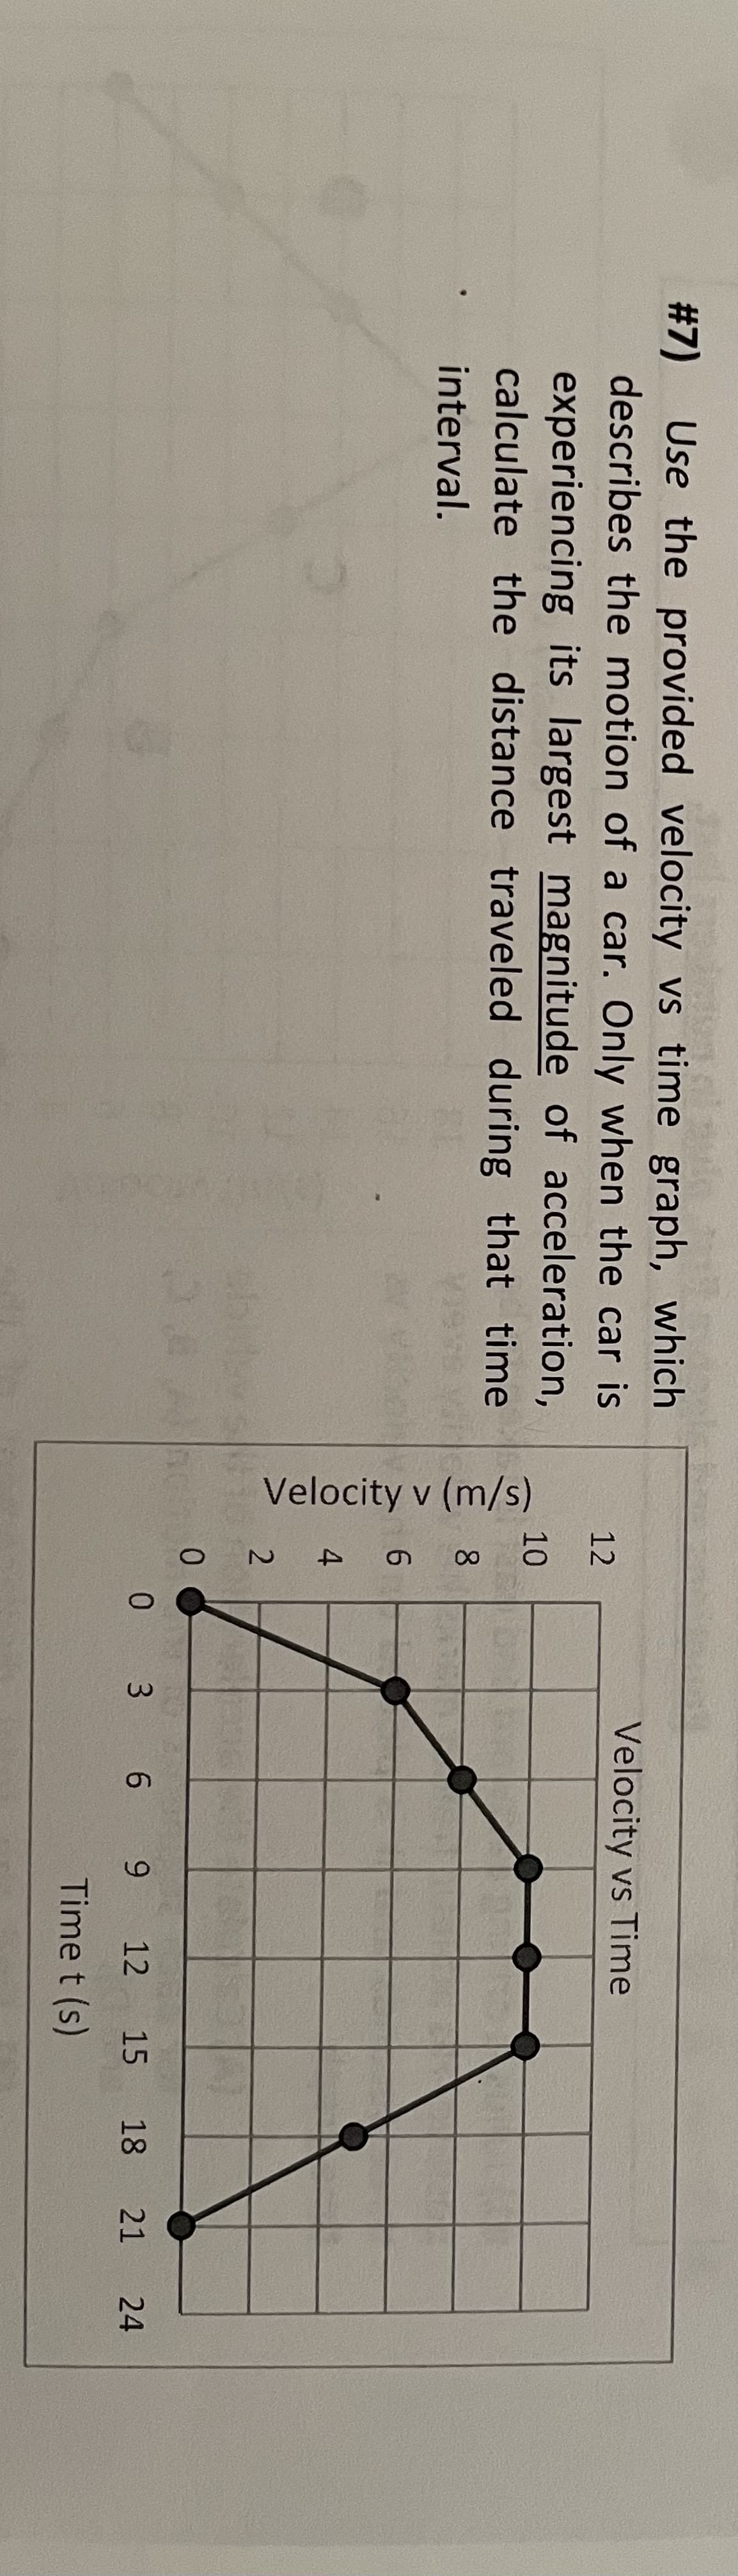 #7) Use the provided velocity vs time graph, which
describes the motion of a car. Only when the car is
experiencing its largest magnitude of acceleration,
calculate the distance traveled during that time
interval.
12
10
∞
Velocity v (m/s)
6
4
2
0
Velocity vs Time
0 3 6 9
12
Time t (s)
15 18 21
24